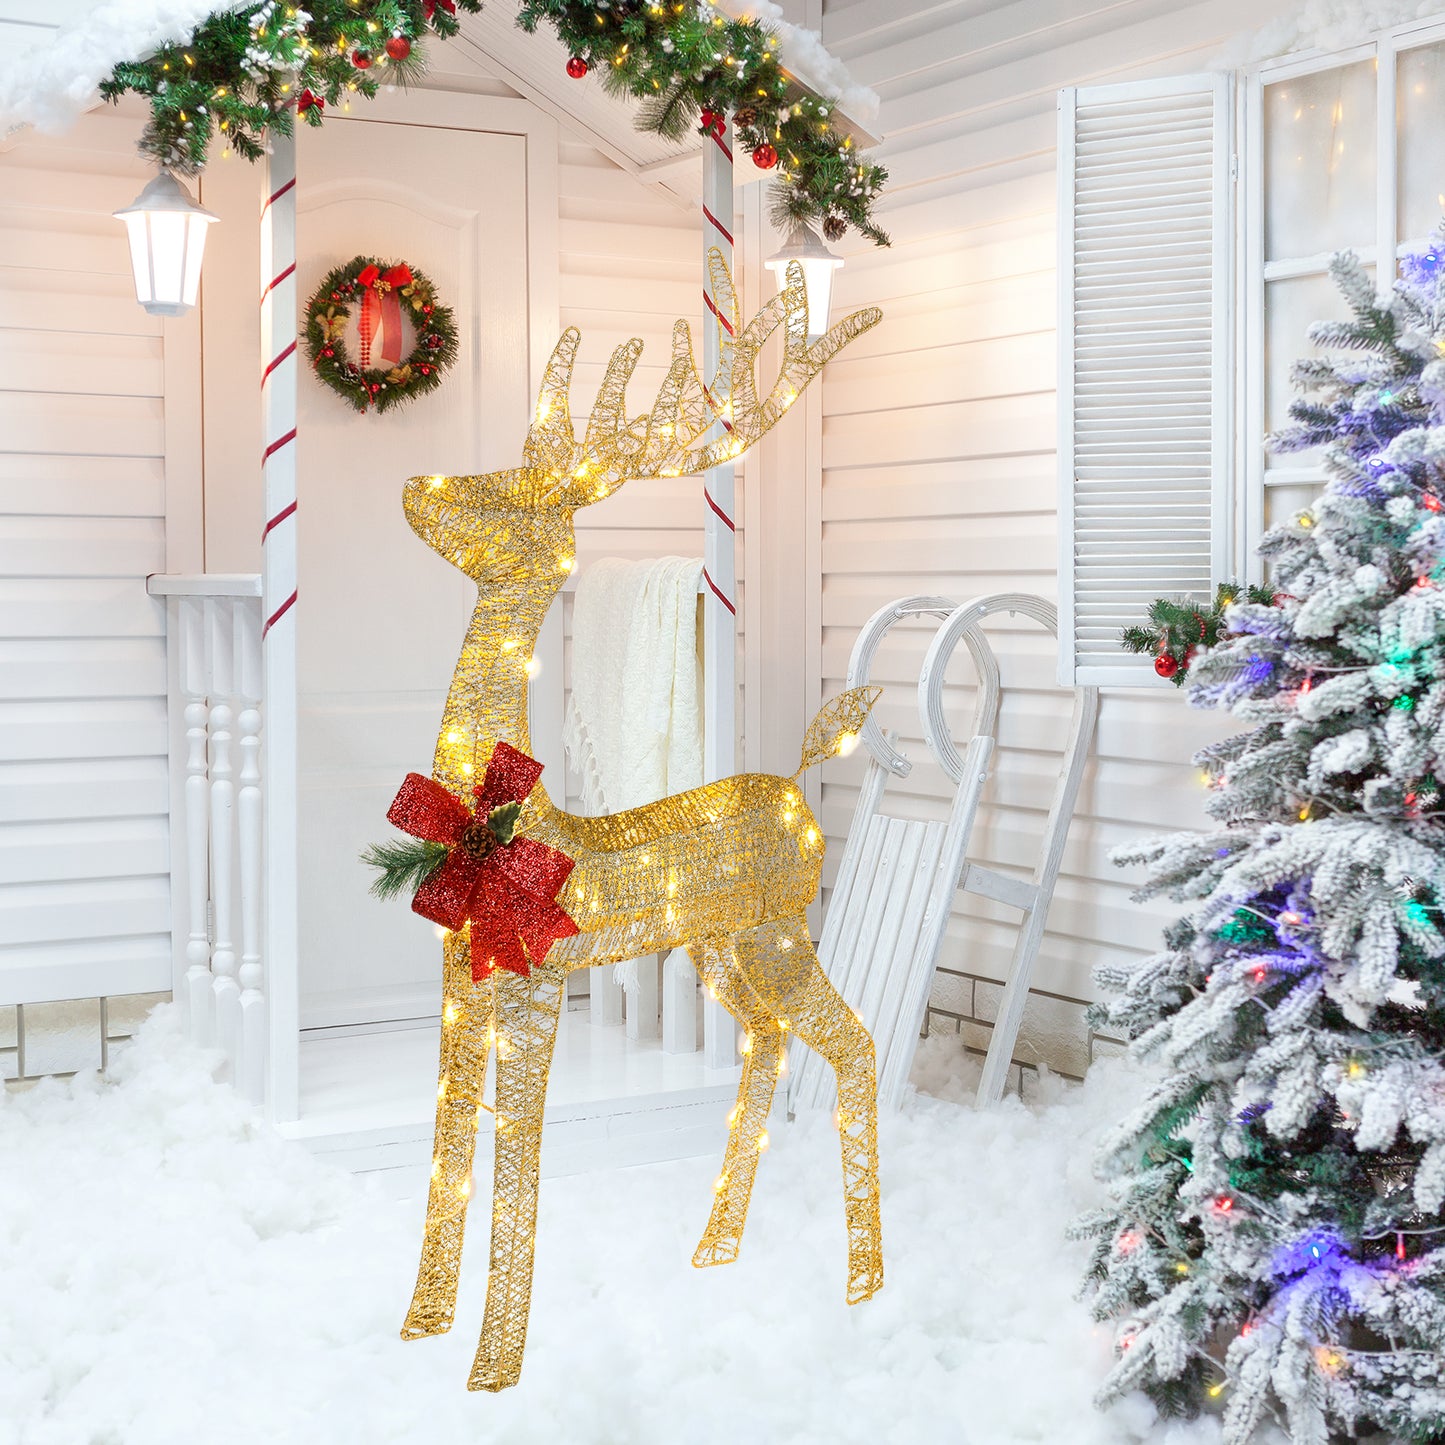 Lighted Christmas Reindeer Outdoor Decorations, Weather Proof 4ft Santa's Sleigh Reindeer Christmas Ornament Indoor Home Decor Pre-lit 90 LED Lights with Stakes, Zip Ties Secured